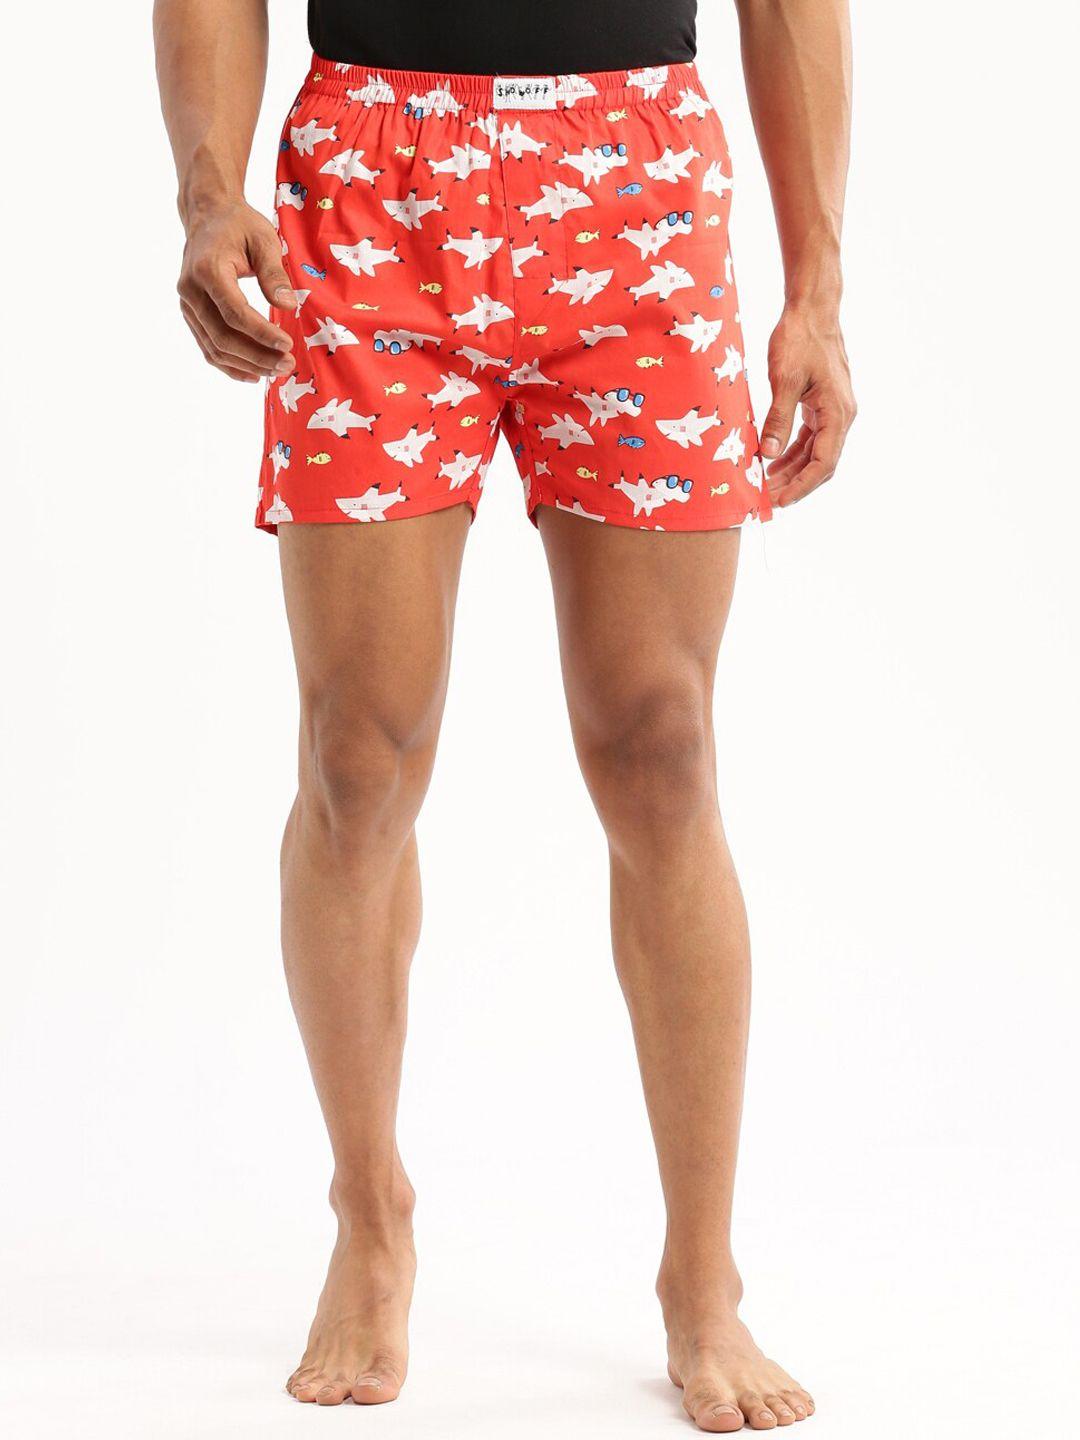 showoff slim fit conversational printed cotton boxer am-126-9_red